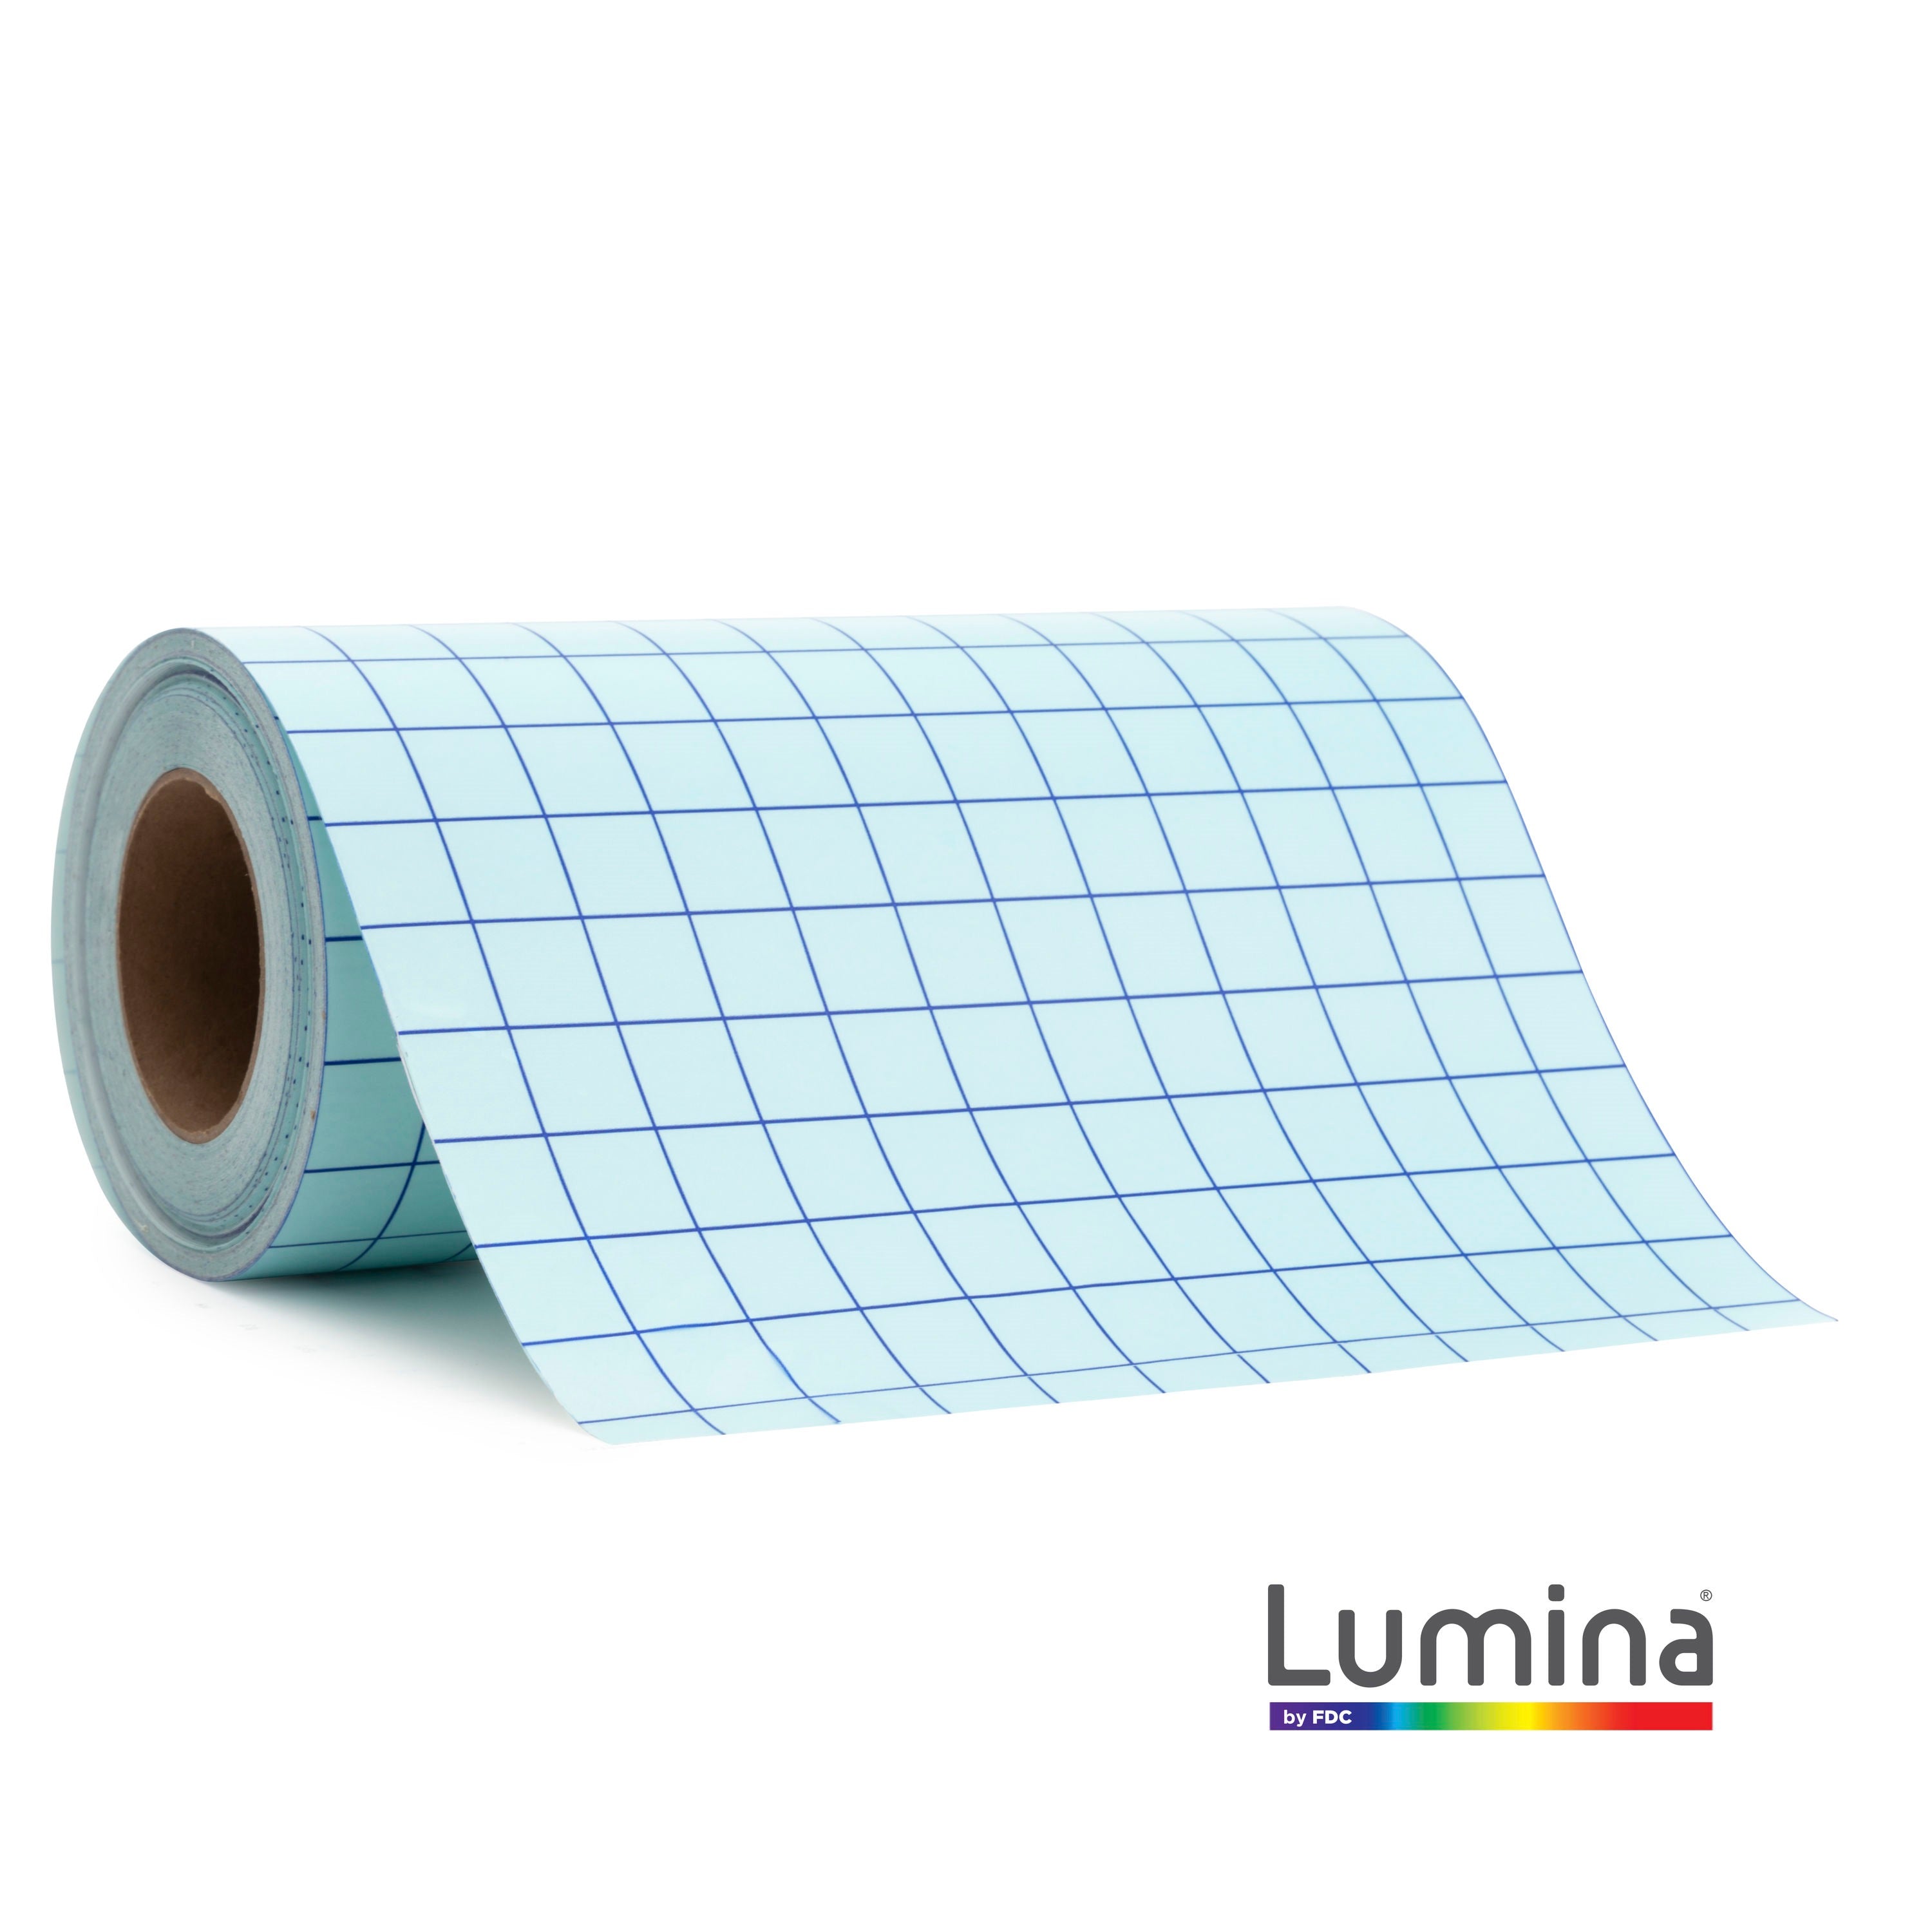 Gridlined Paper Transfer Tape - 12x30' Roll (Blue 1 Grid